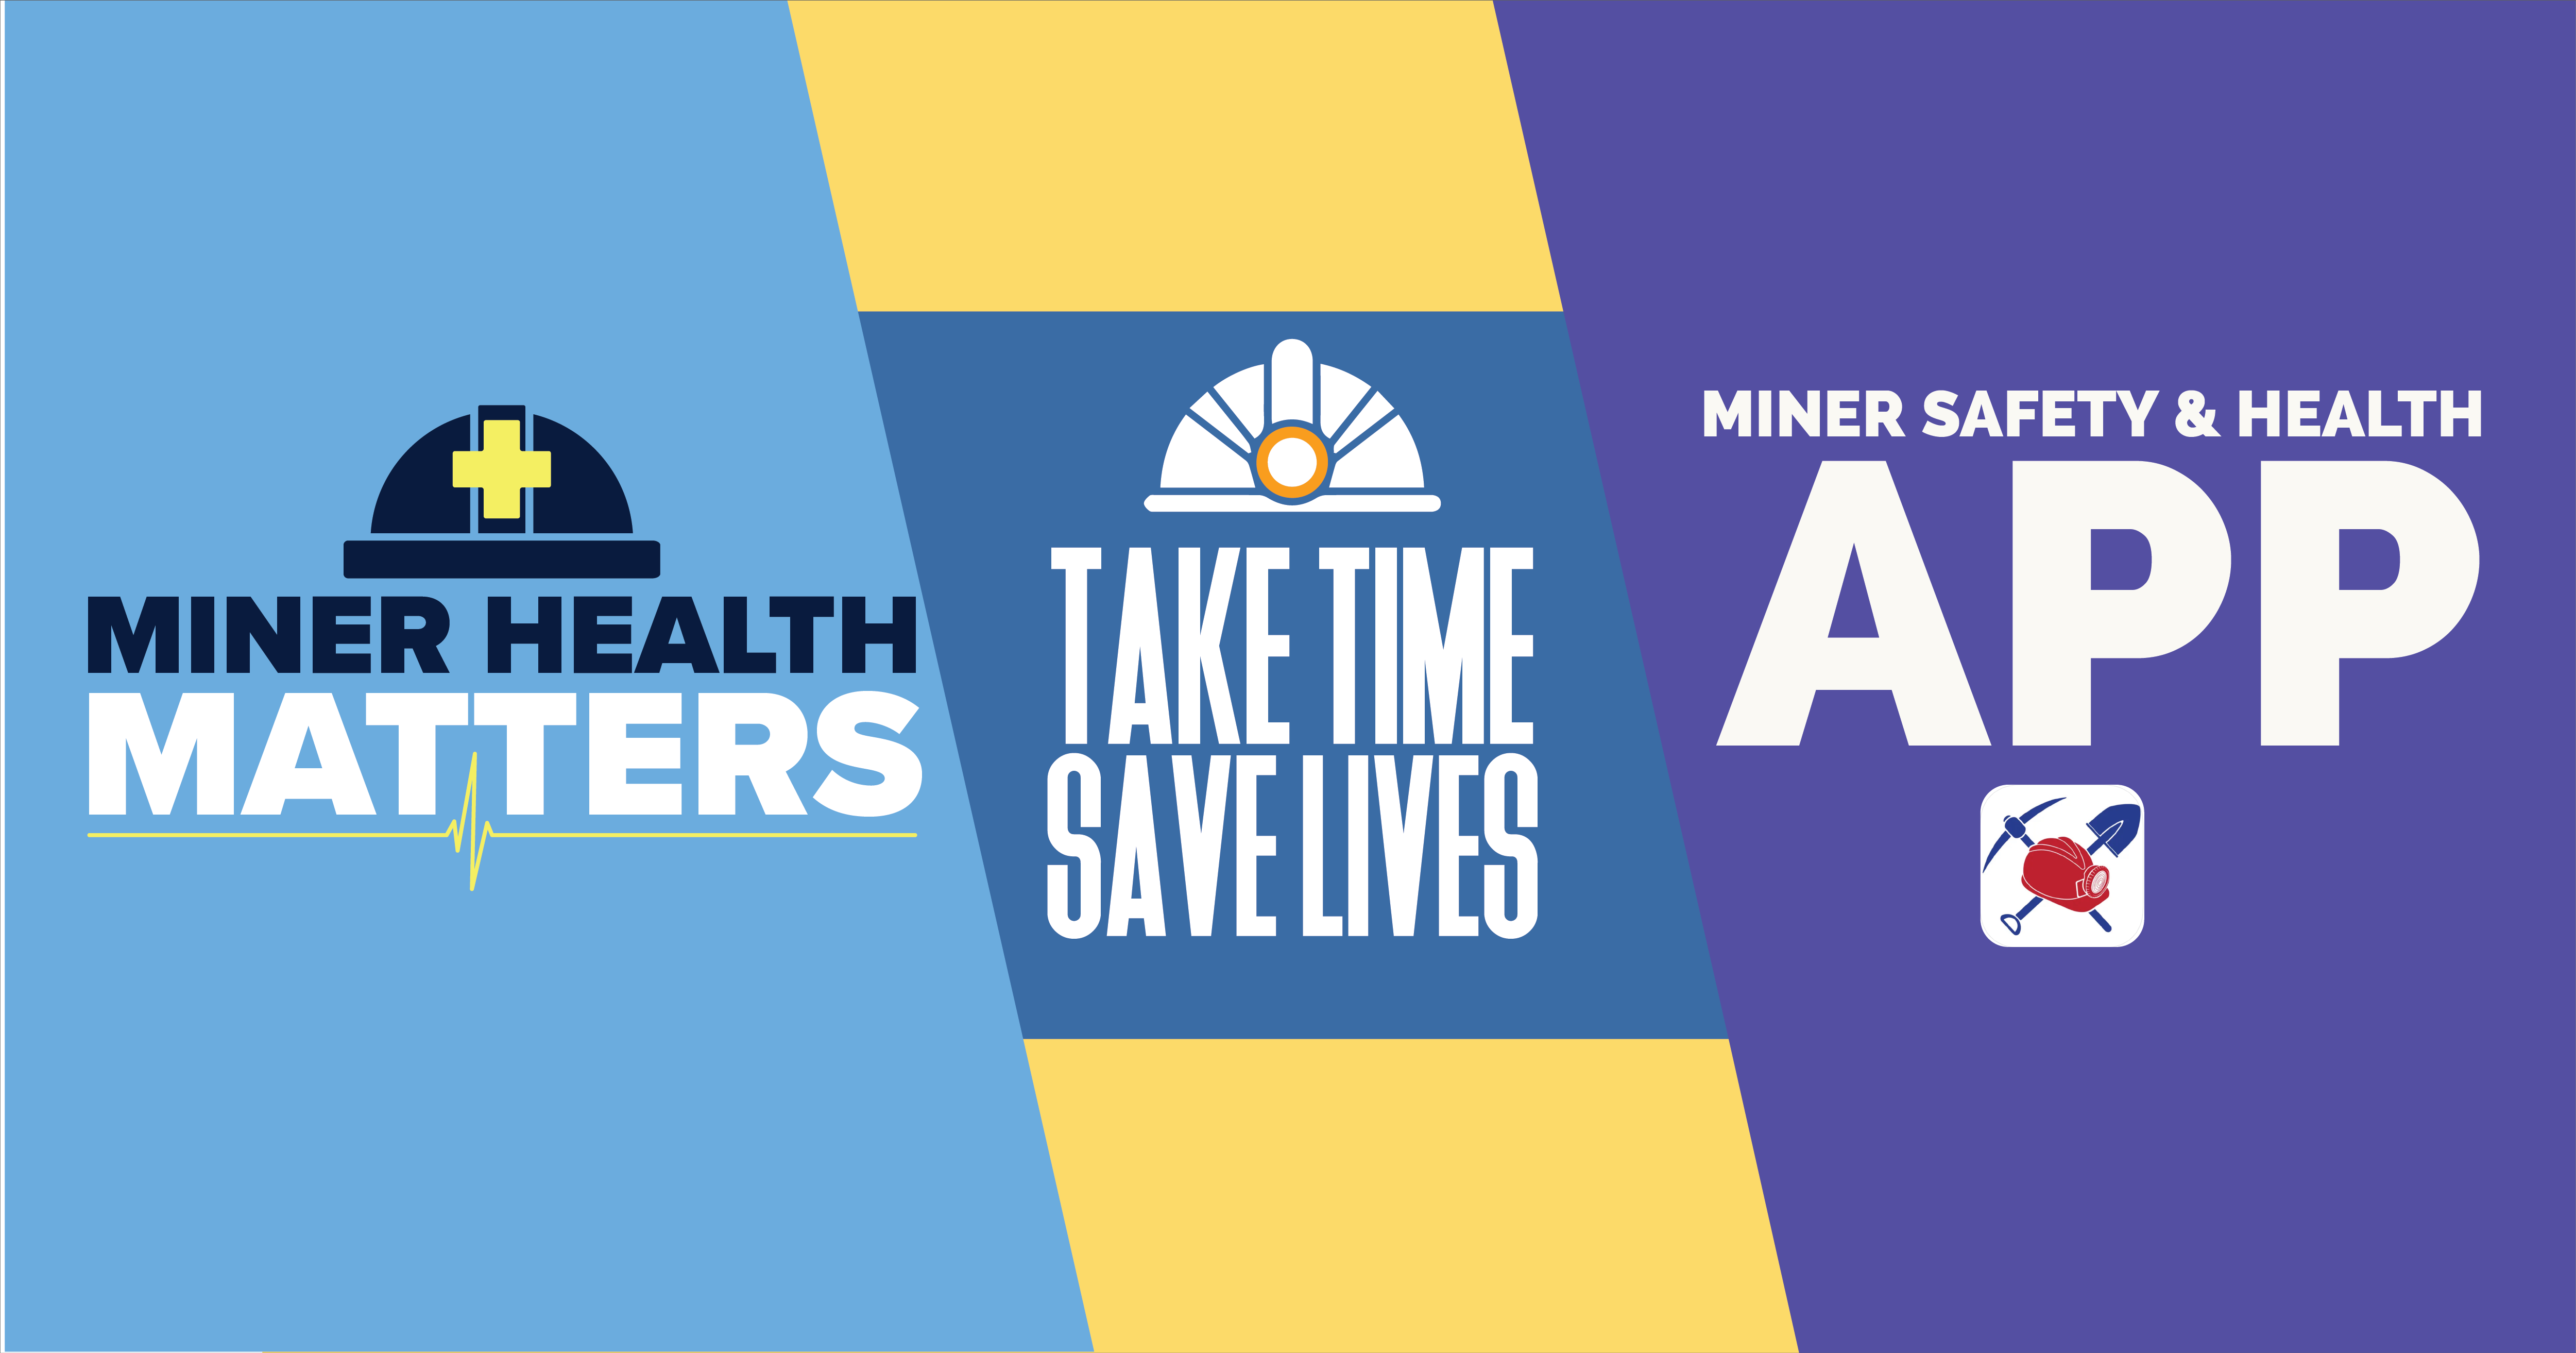 A collage of brightly colored MSHA graphics, including one about the Miner Health Matters, the Take Time Save Lives initiative, and the Miner App.